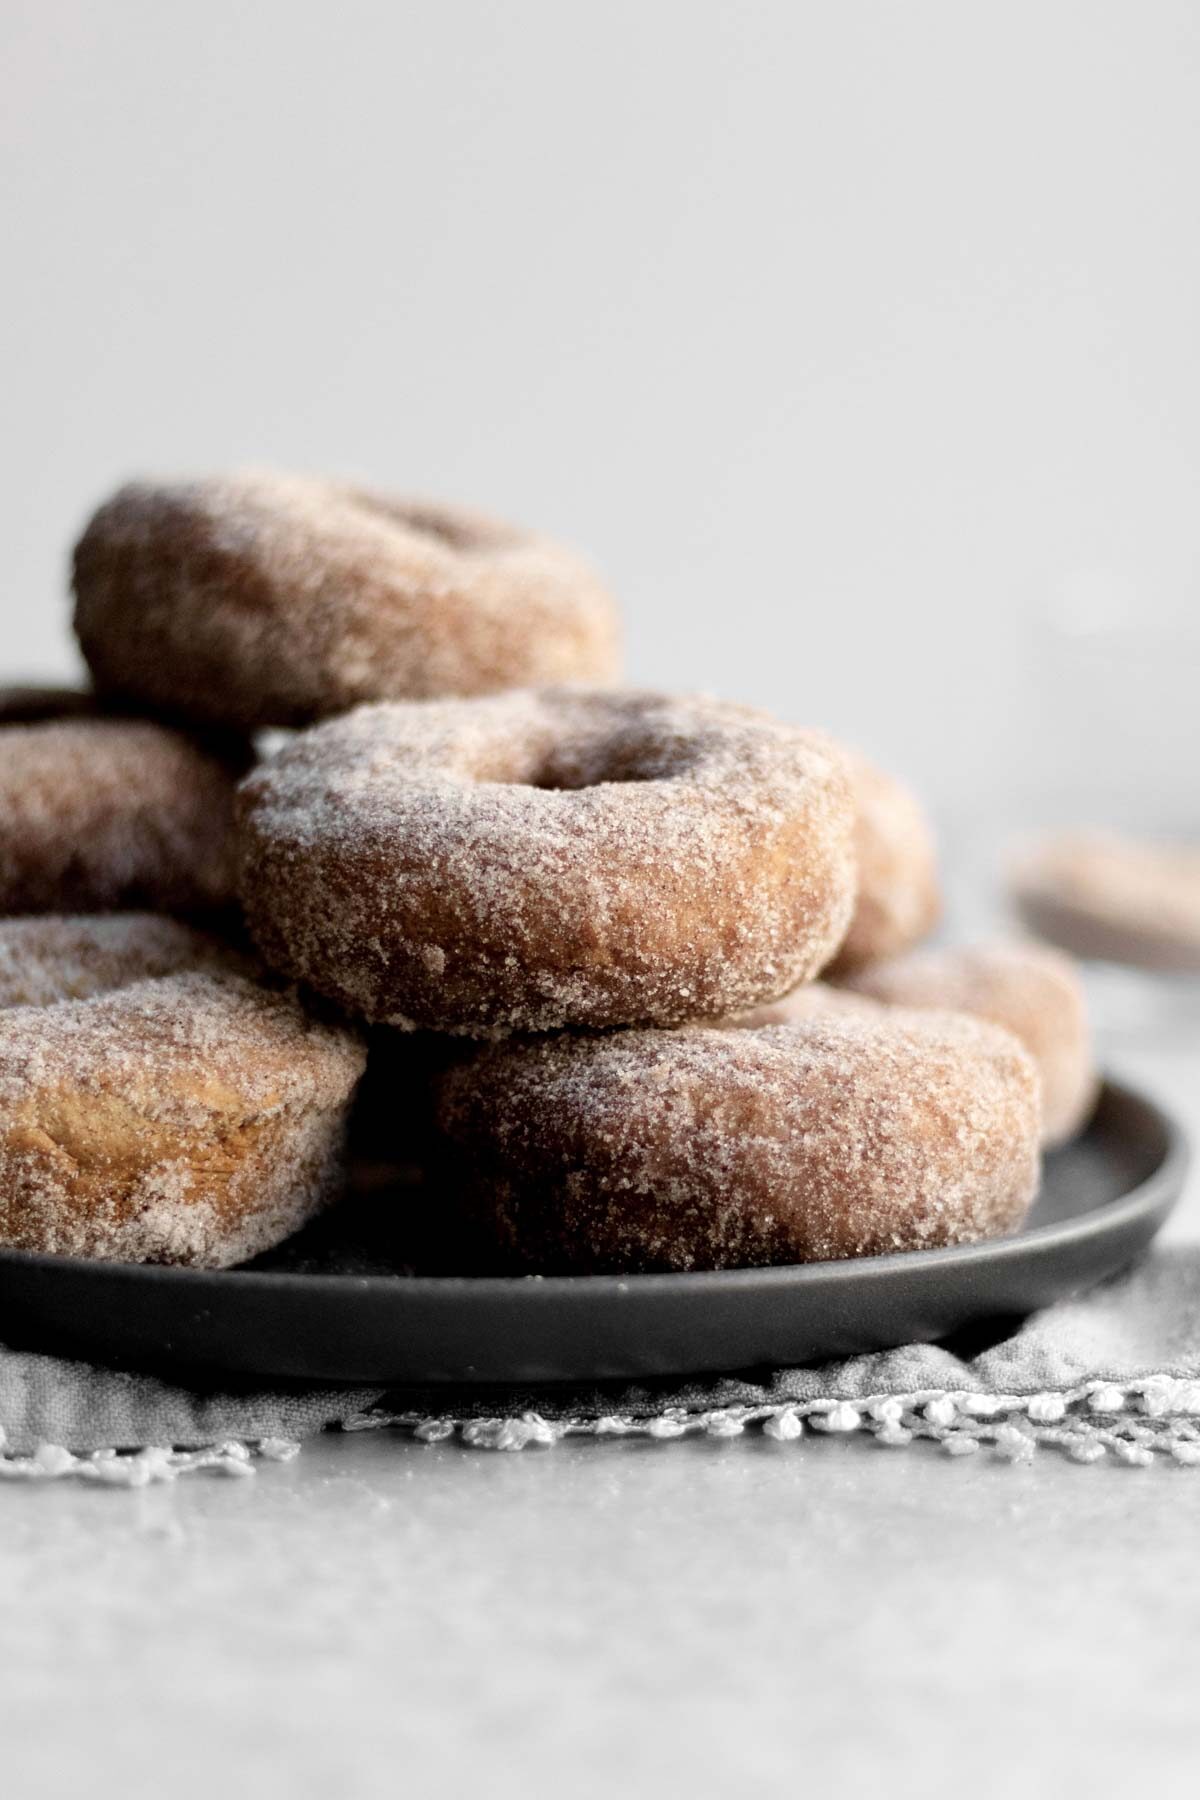 A plate of donuts sit covered in cinnamon sugar.